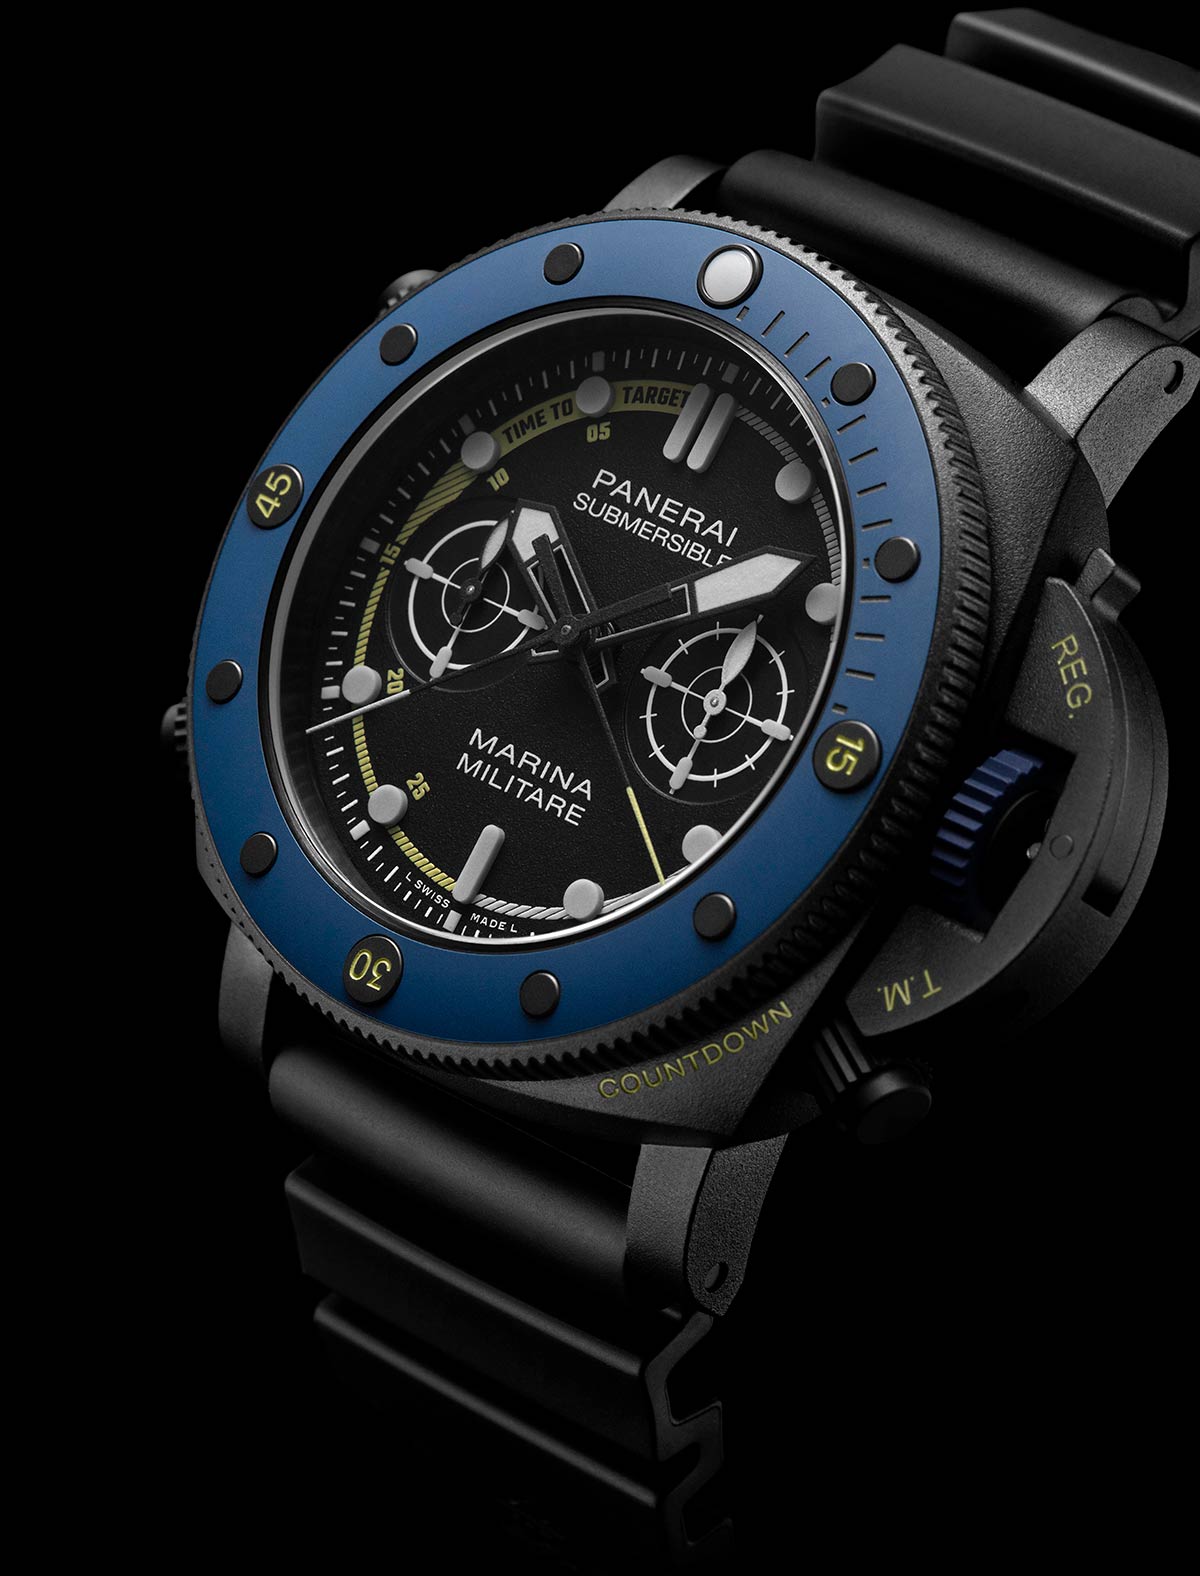 Panerai Submersible Forze Speciali – Element iN Time NYC